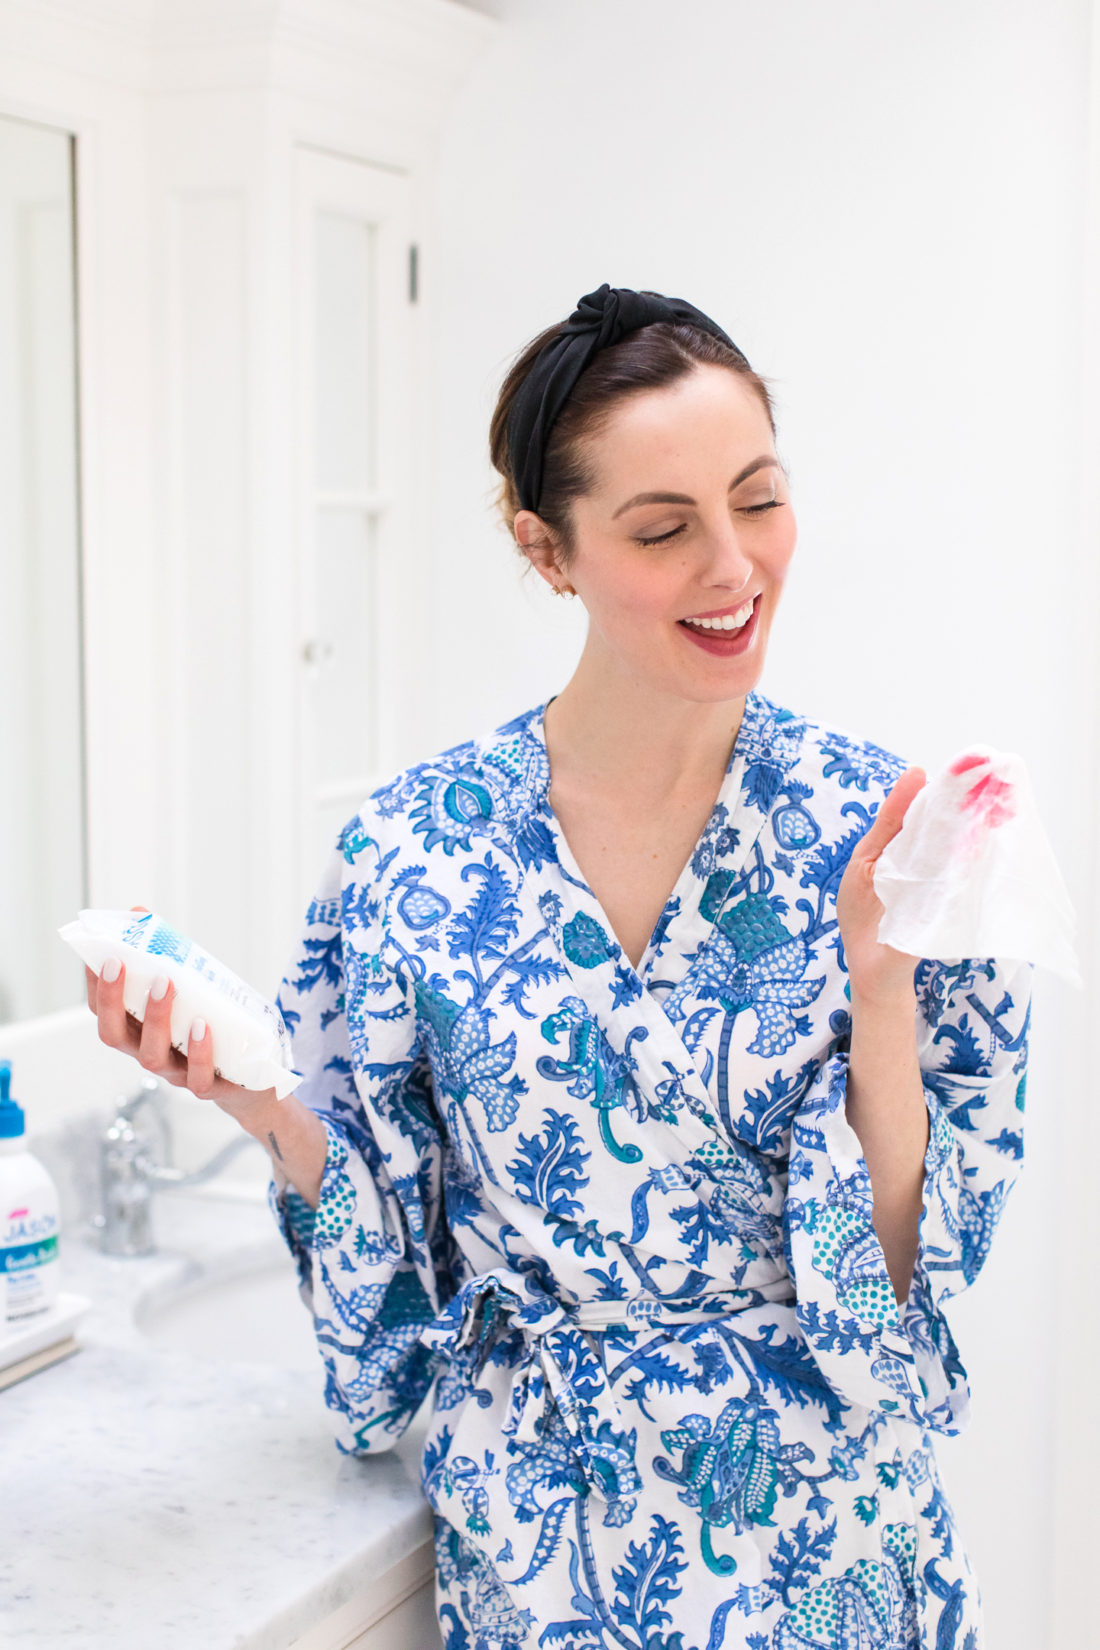 Eva Amurri Martino removes her makeup with a Gentle Basics cleansing wipe